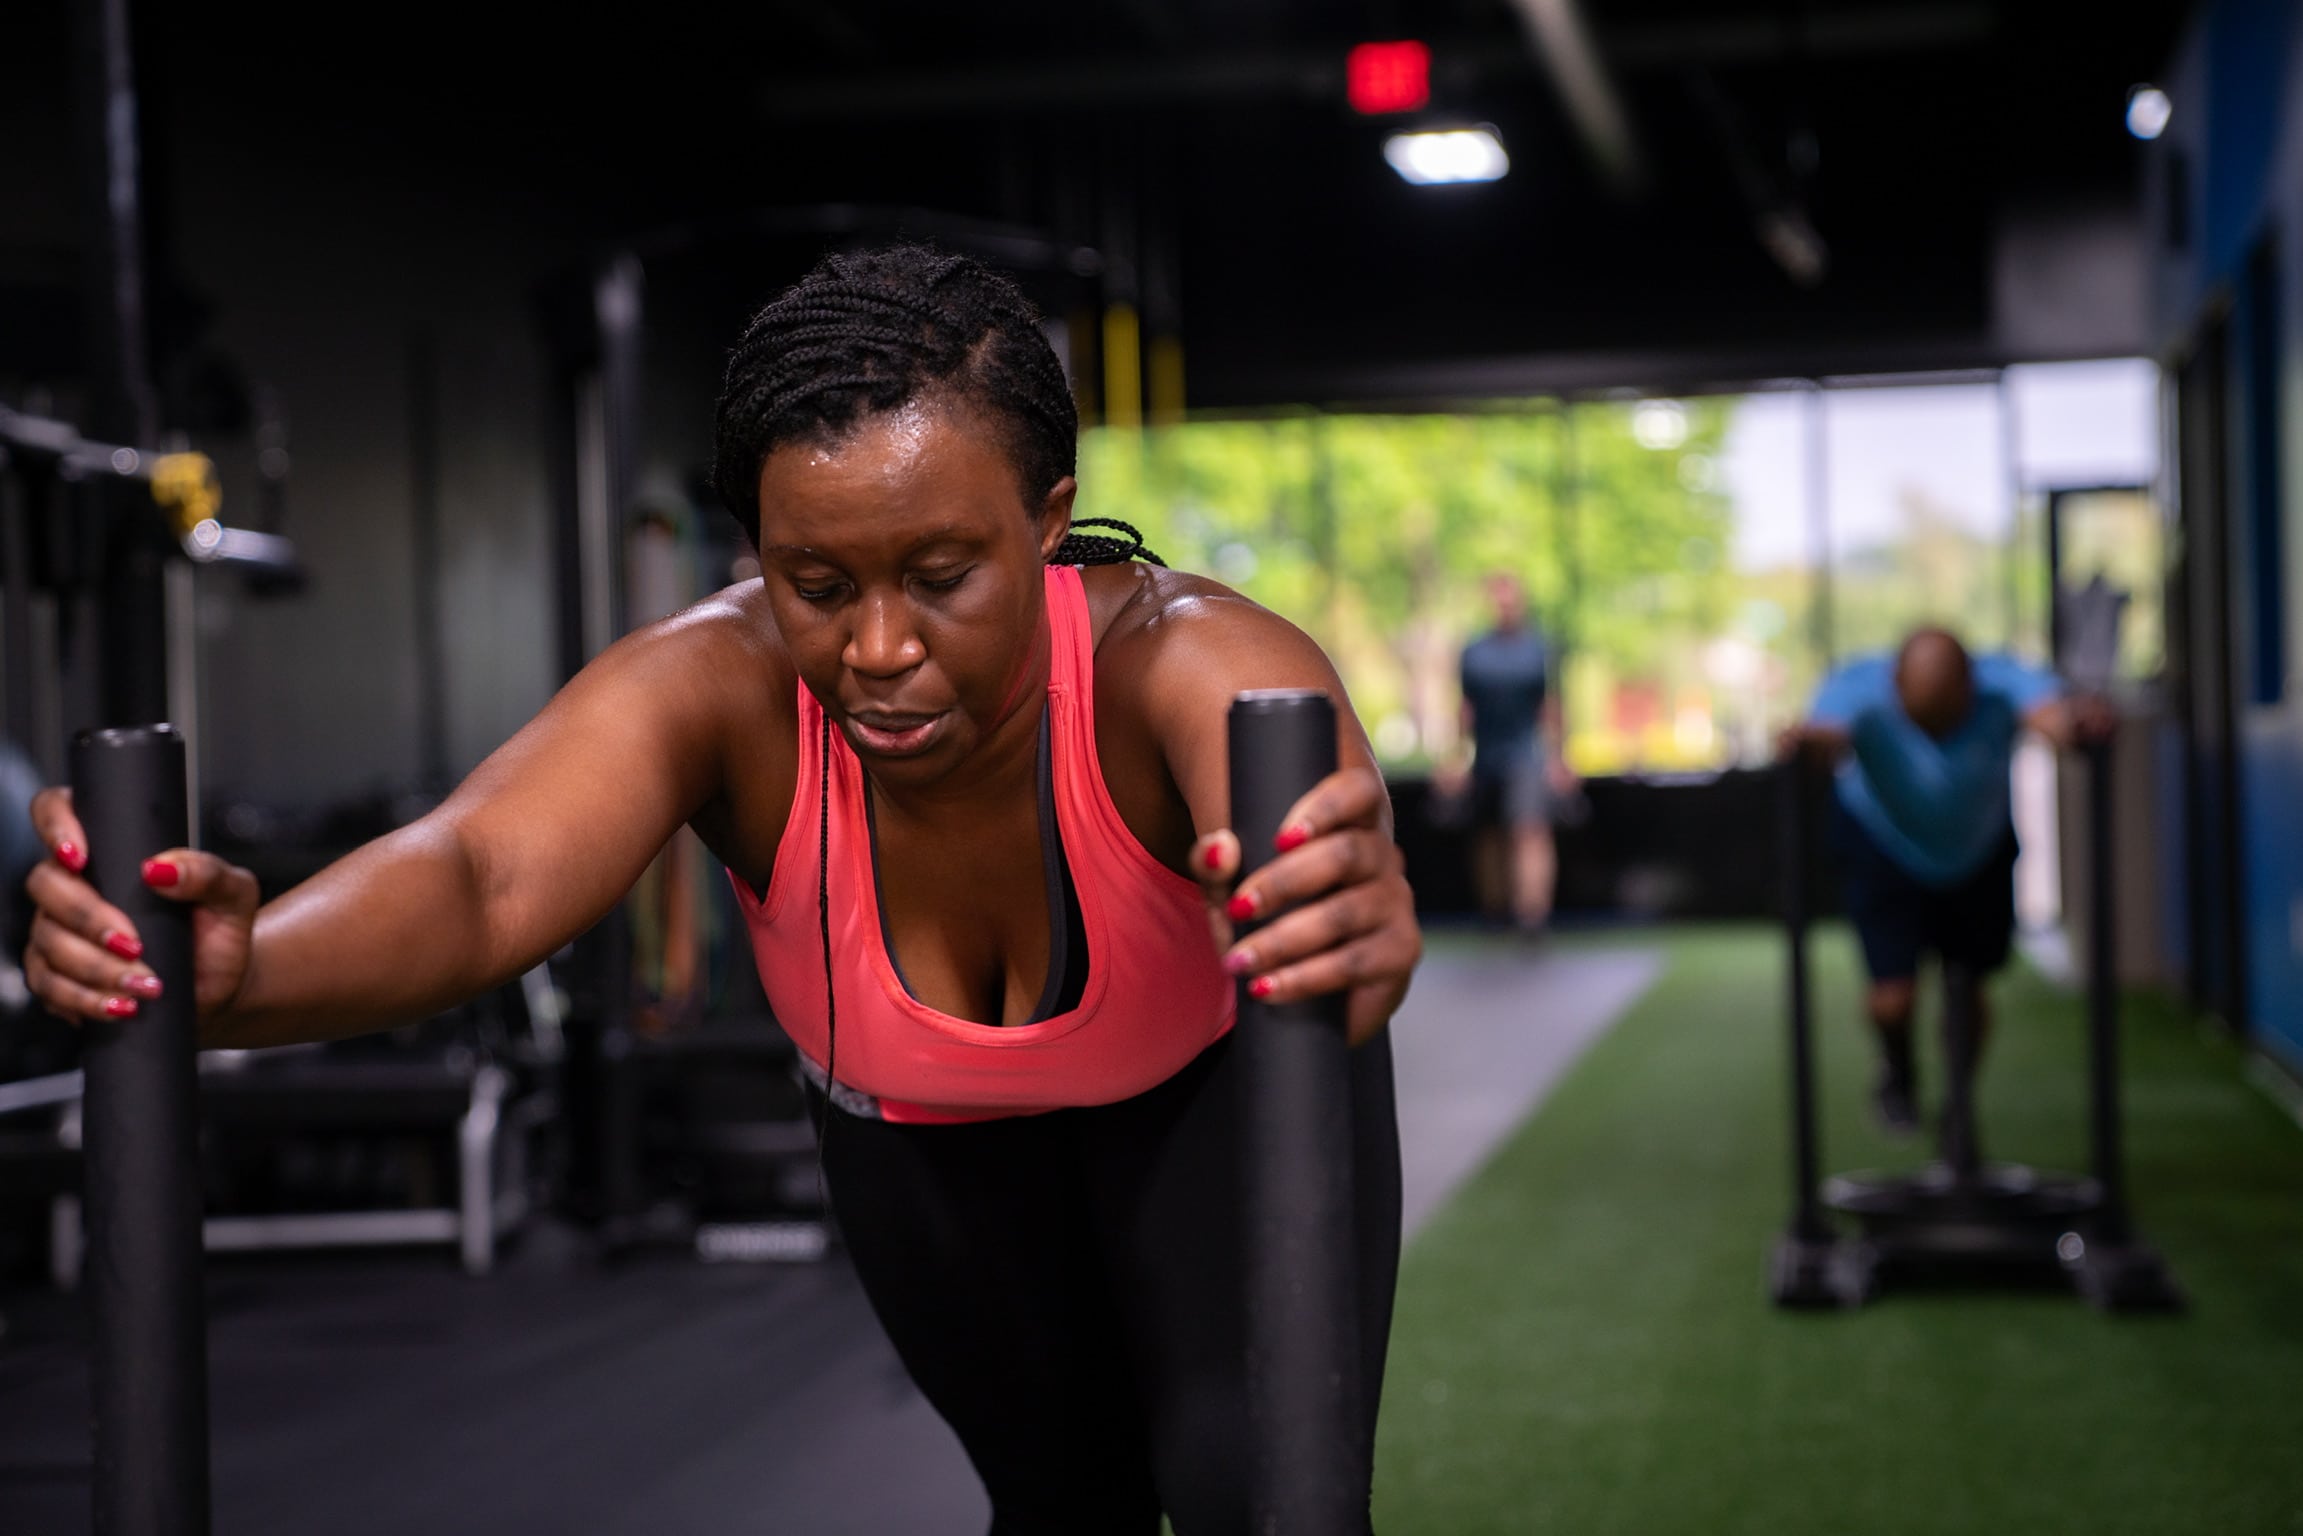 Aniesha working through a tough fitness challenge at Beyond Strength in Sterling, VA